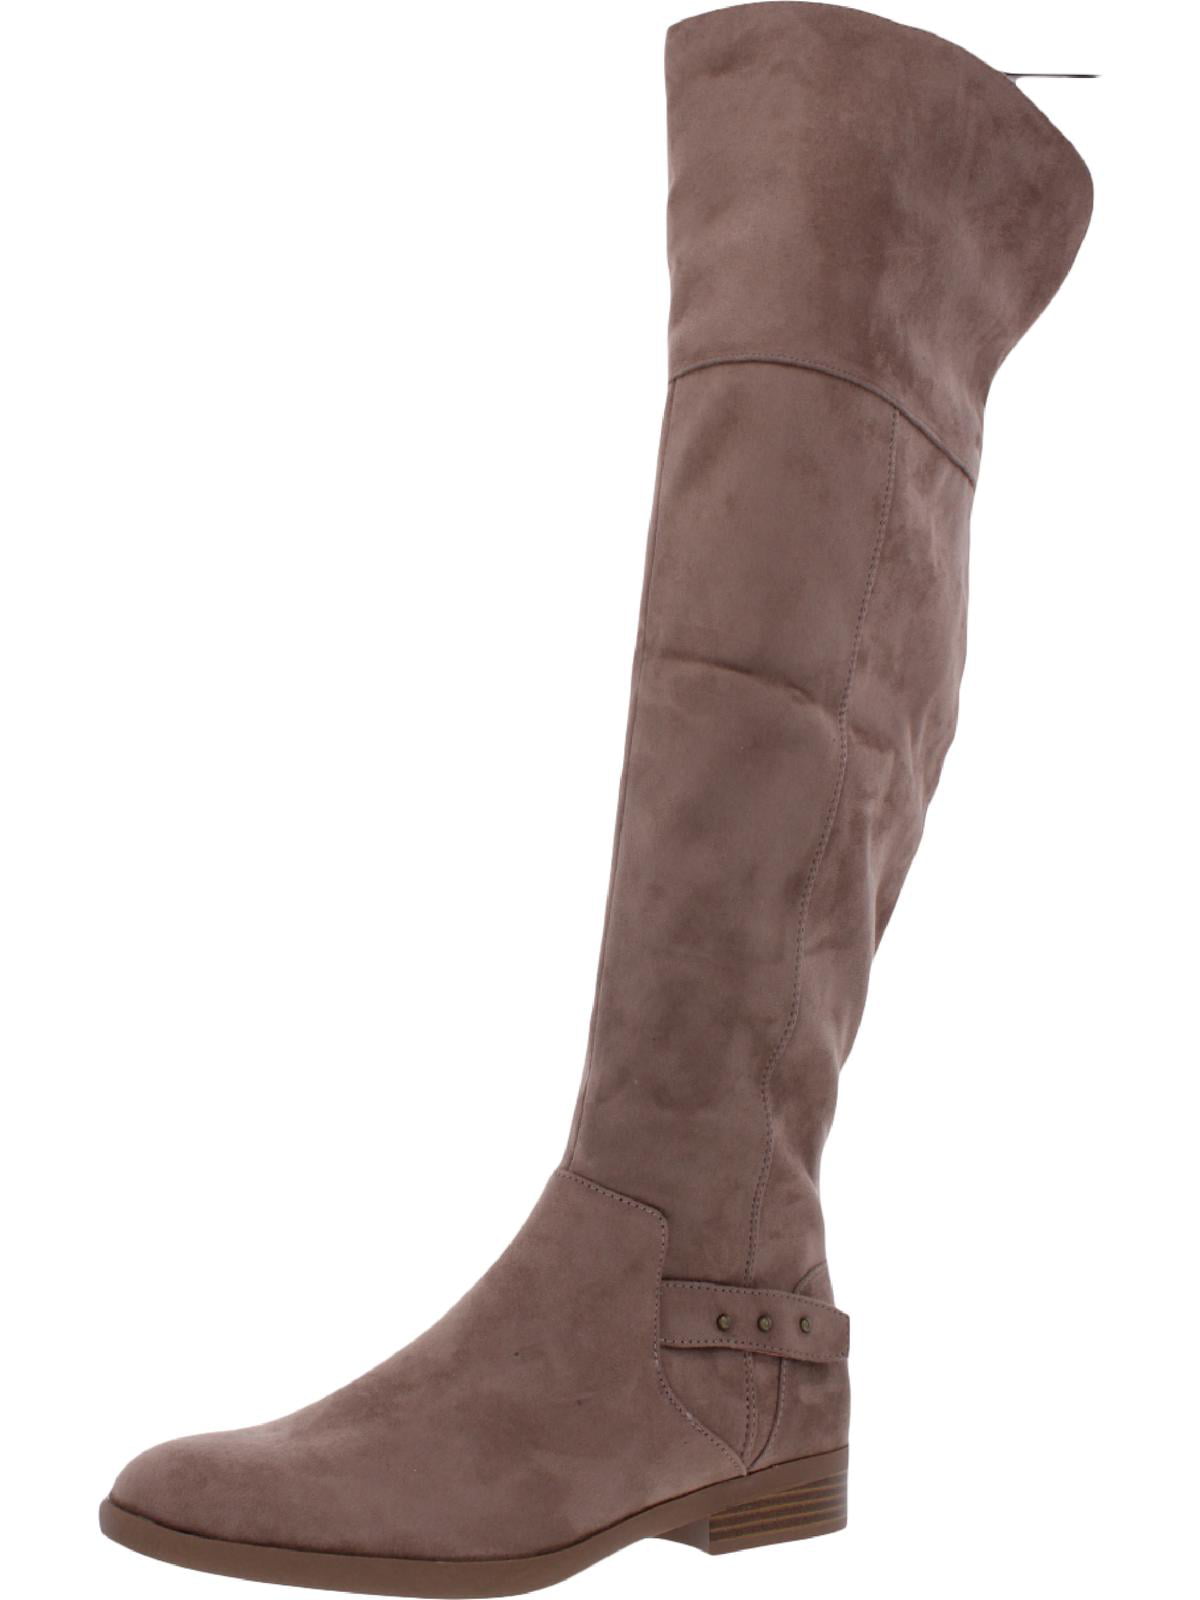 Style & Co Womens Wynterr Suede Almond Toe Knee High Fashion Boots 